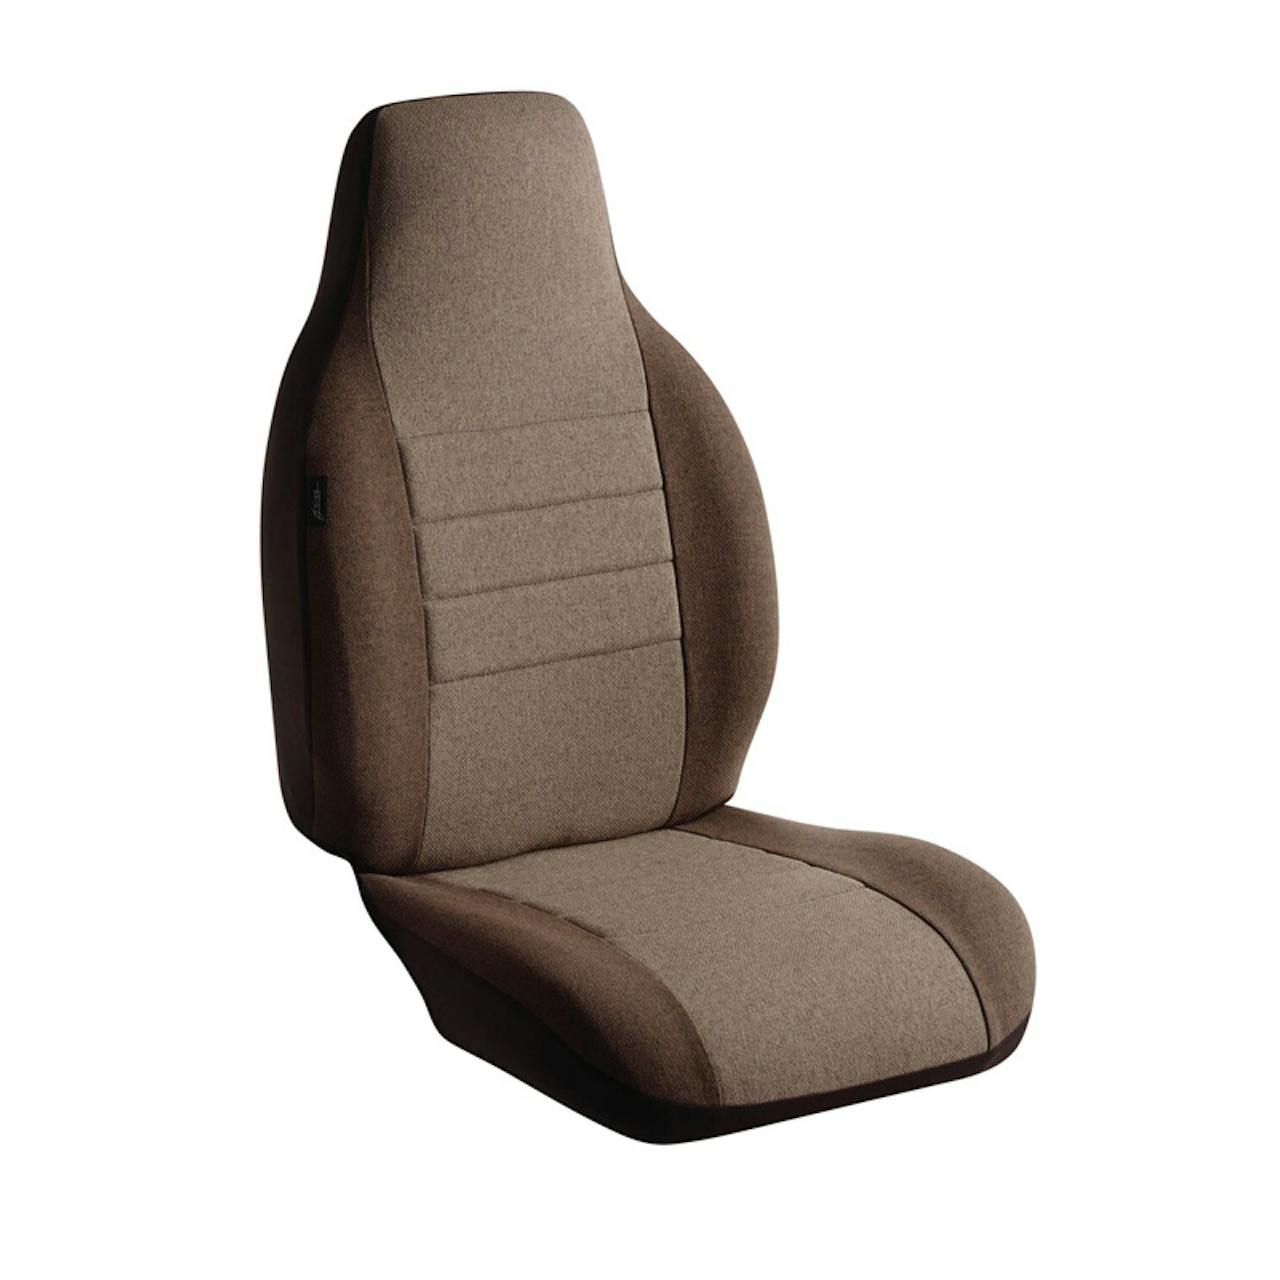 https://raneys-cdn11.imgix.net/images/stencil/original/products/197311/113656/Taupe-Seat-Cover-OE-Series-OE3003__01200.1507042912.jpg?auto=compress,format&w=1280